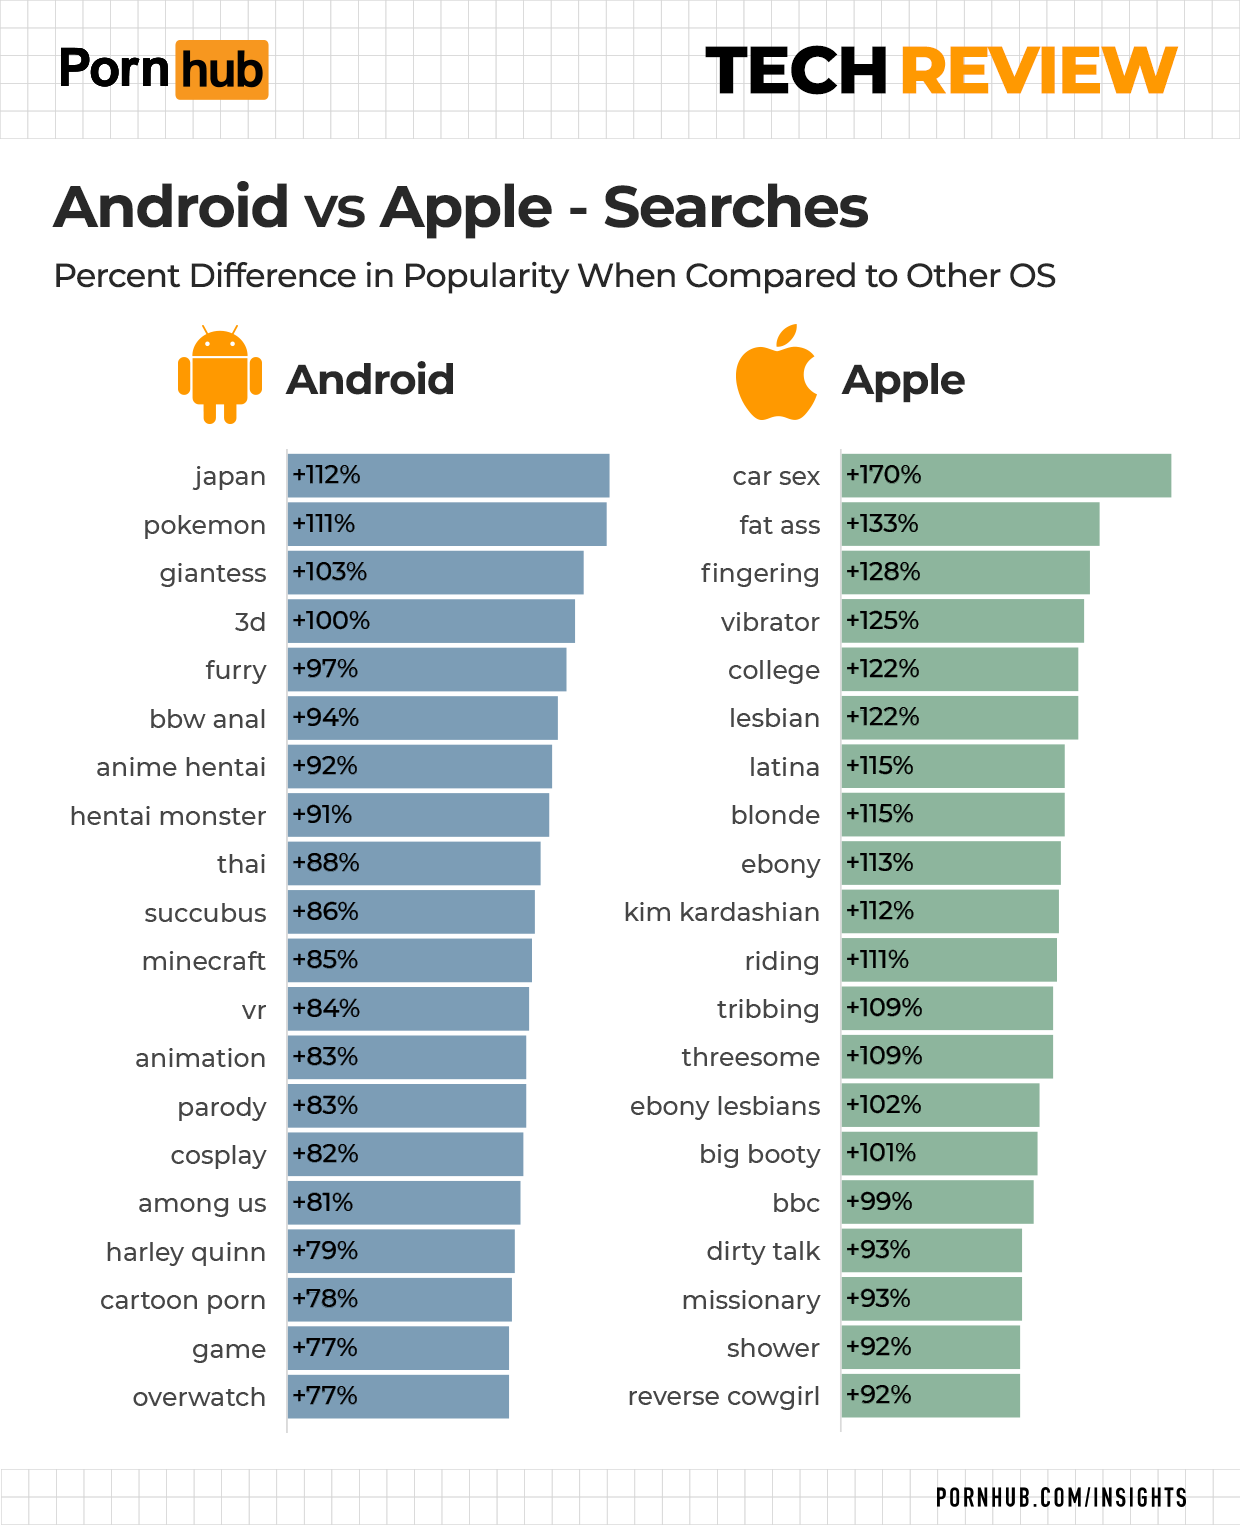 https://www.pornhub.com/insights/wp-content/uploads/2021/03/pornhub-insights-2021-tech-review-searches-android-vs-apple.png